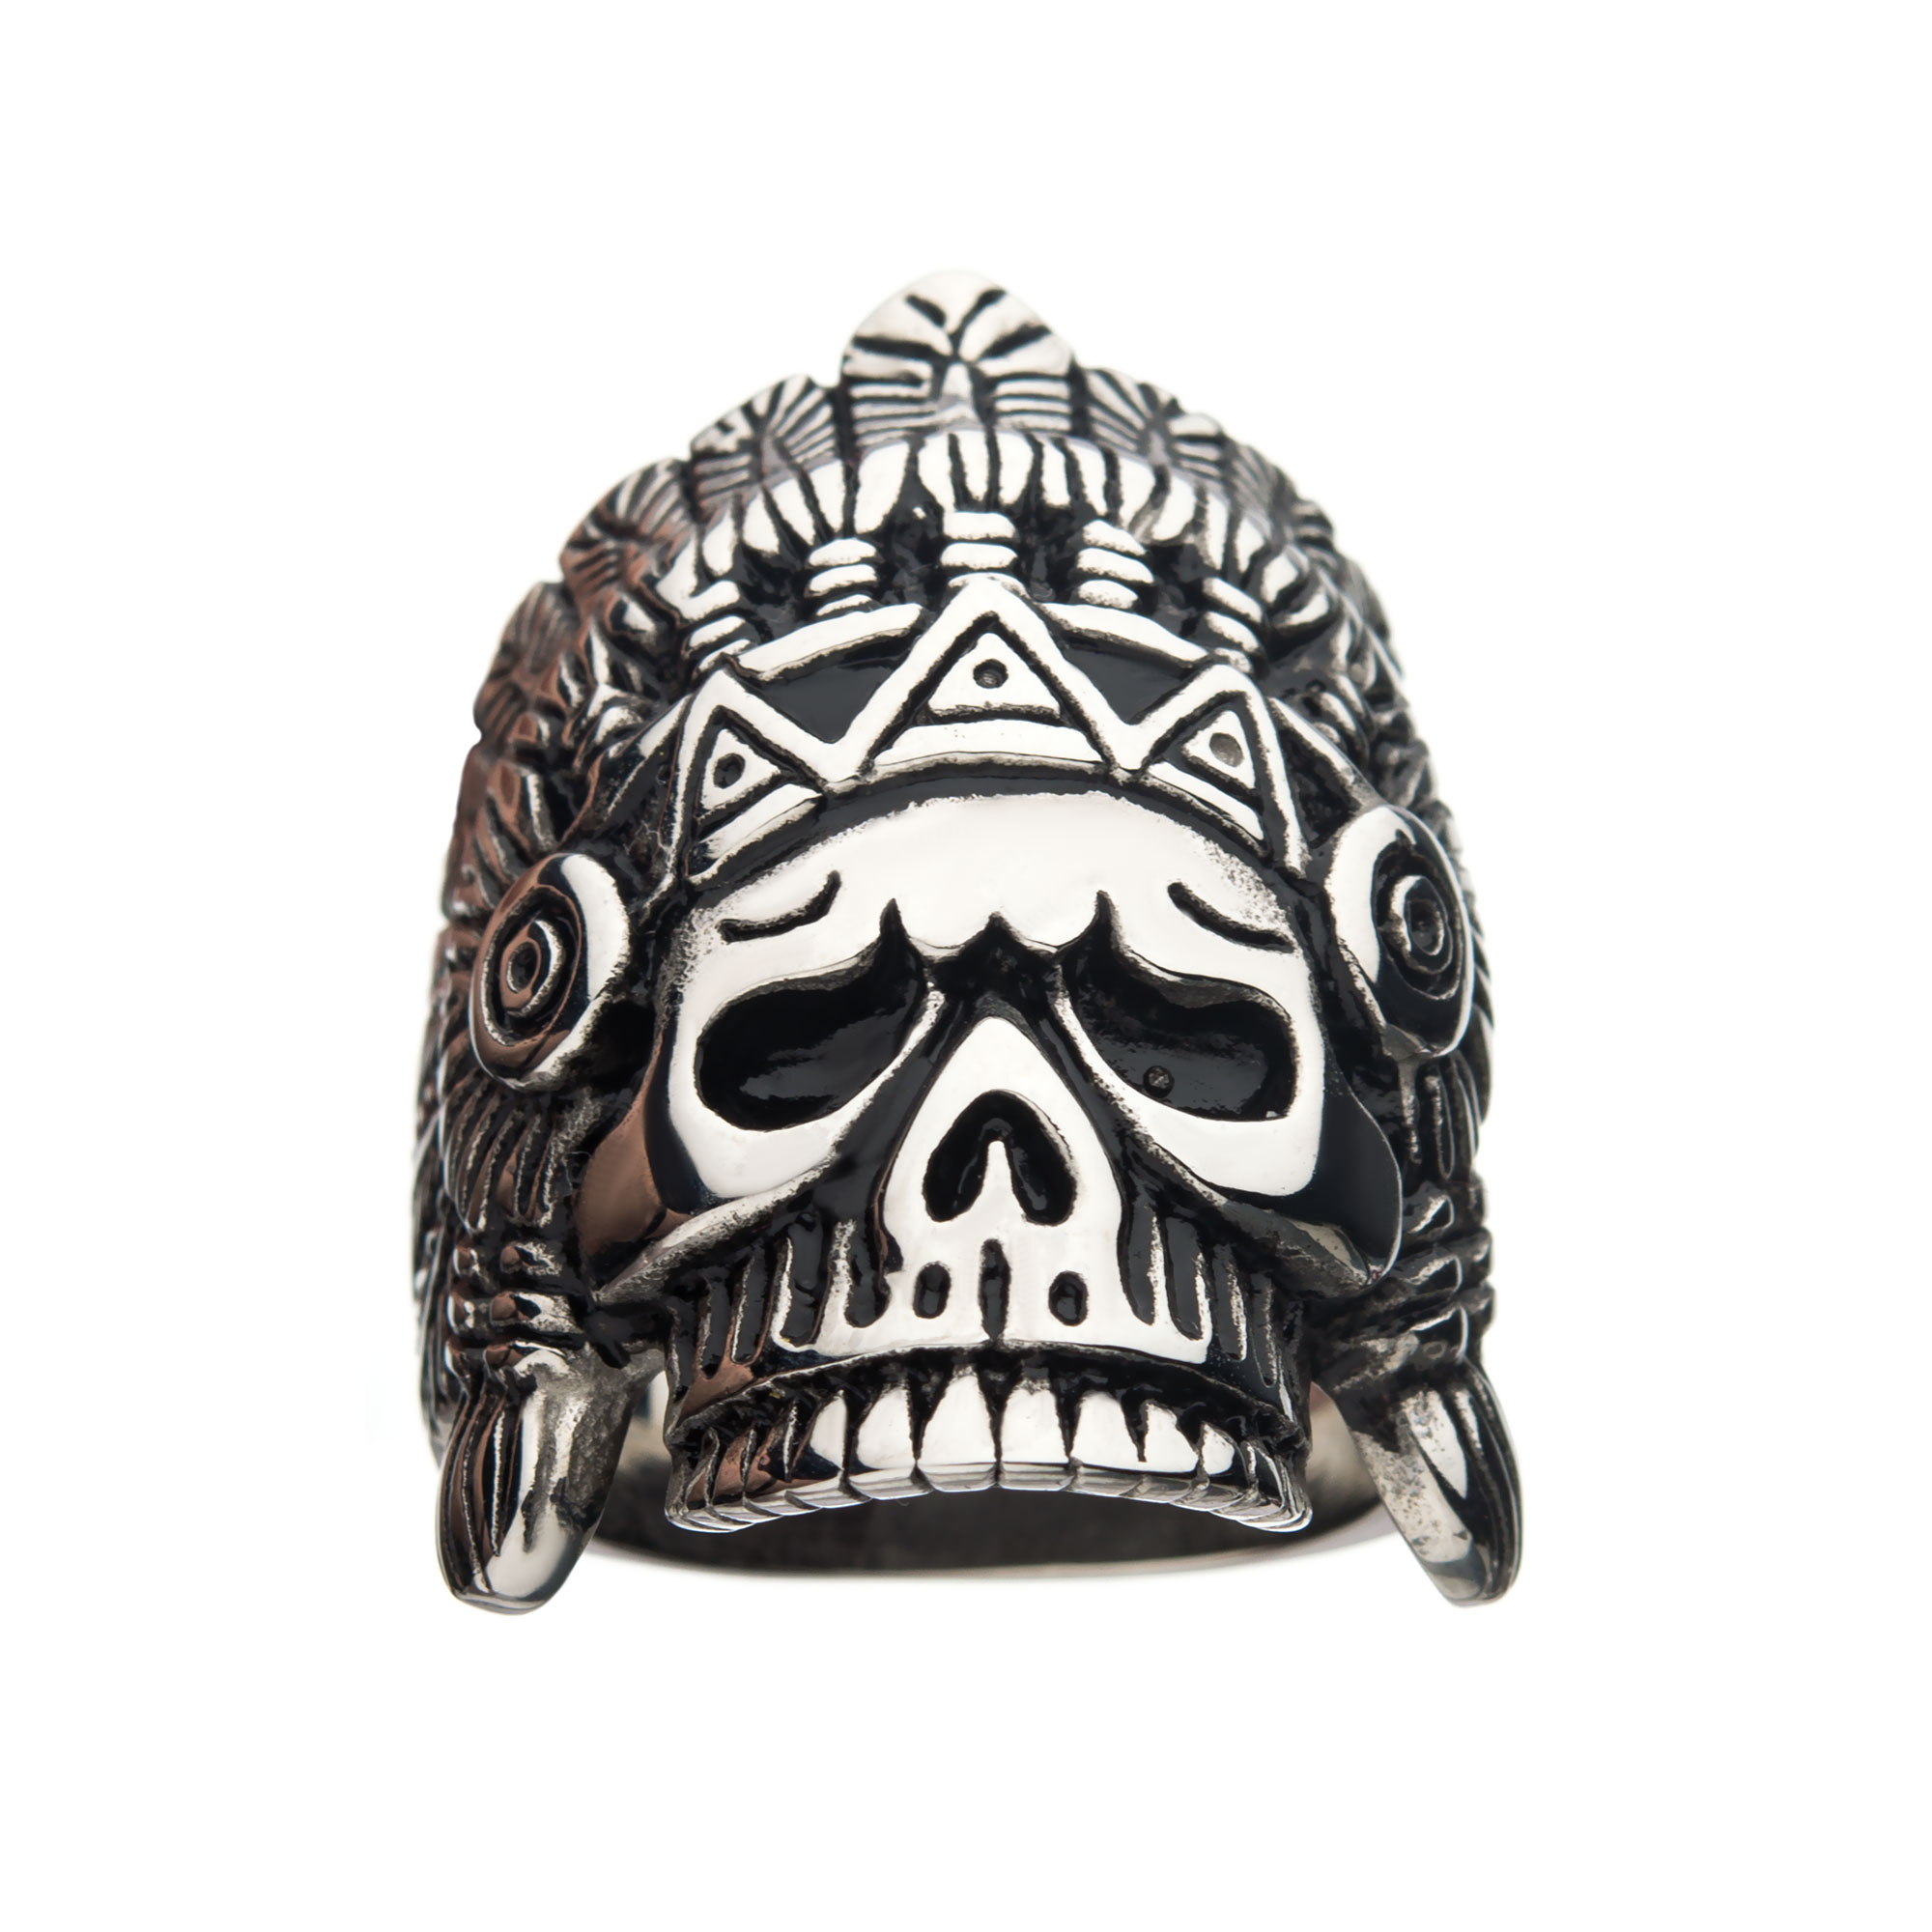 Oxidized Stainless Steel Chief Skull Ring Image 2 Enchanted Jewelry Plainfield, CT